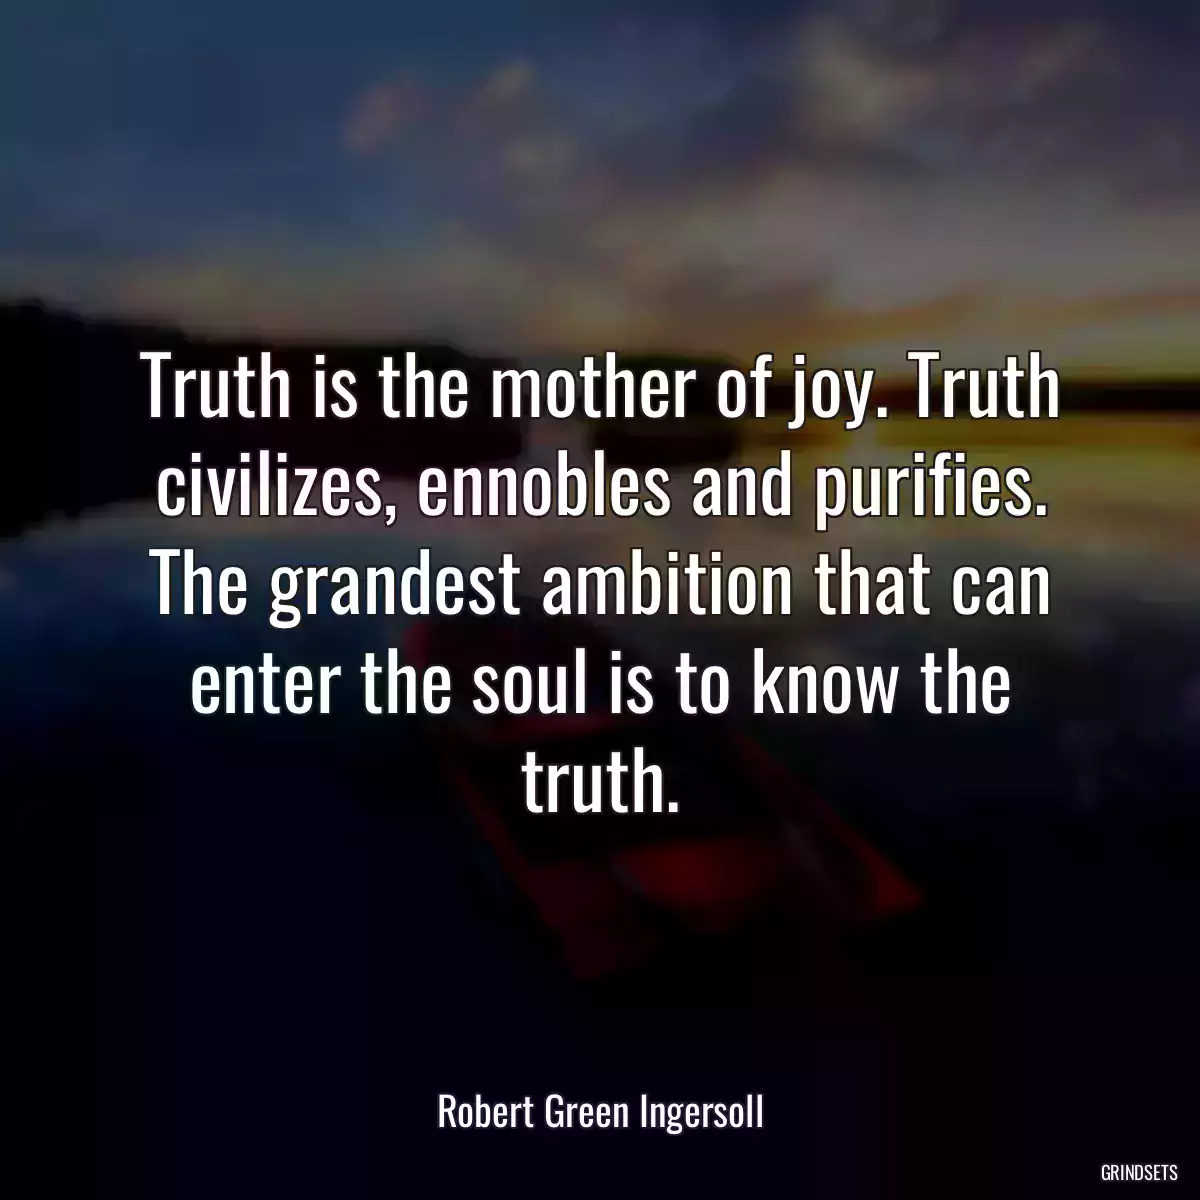 Truth is the mother of joy. Truth civilizes, ennobles and purifies. The grandest ambition that can enter the soul is to know the truth.